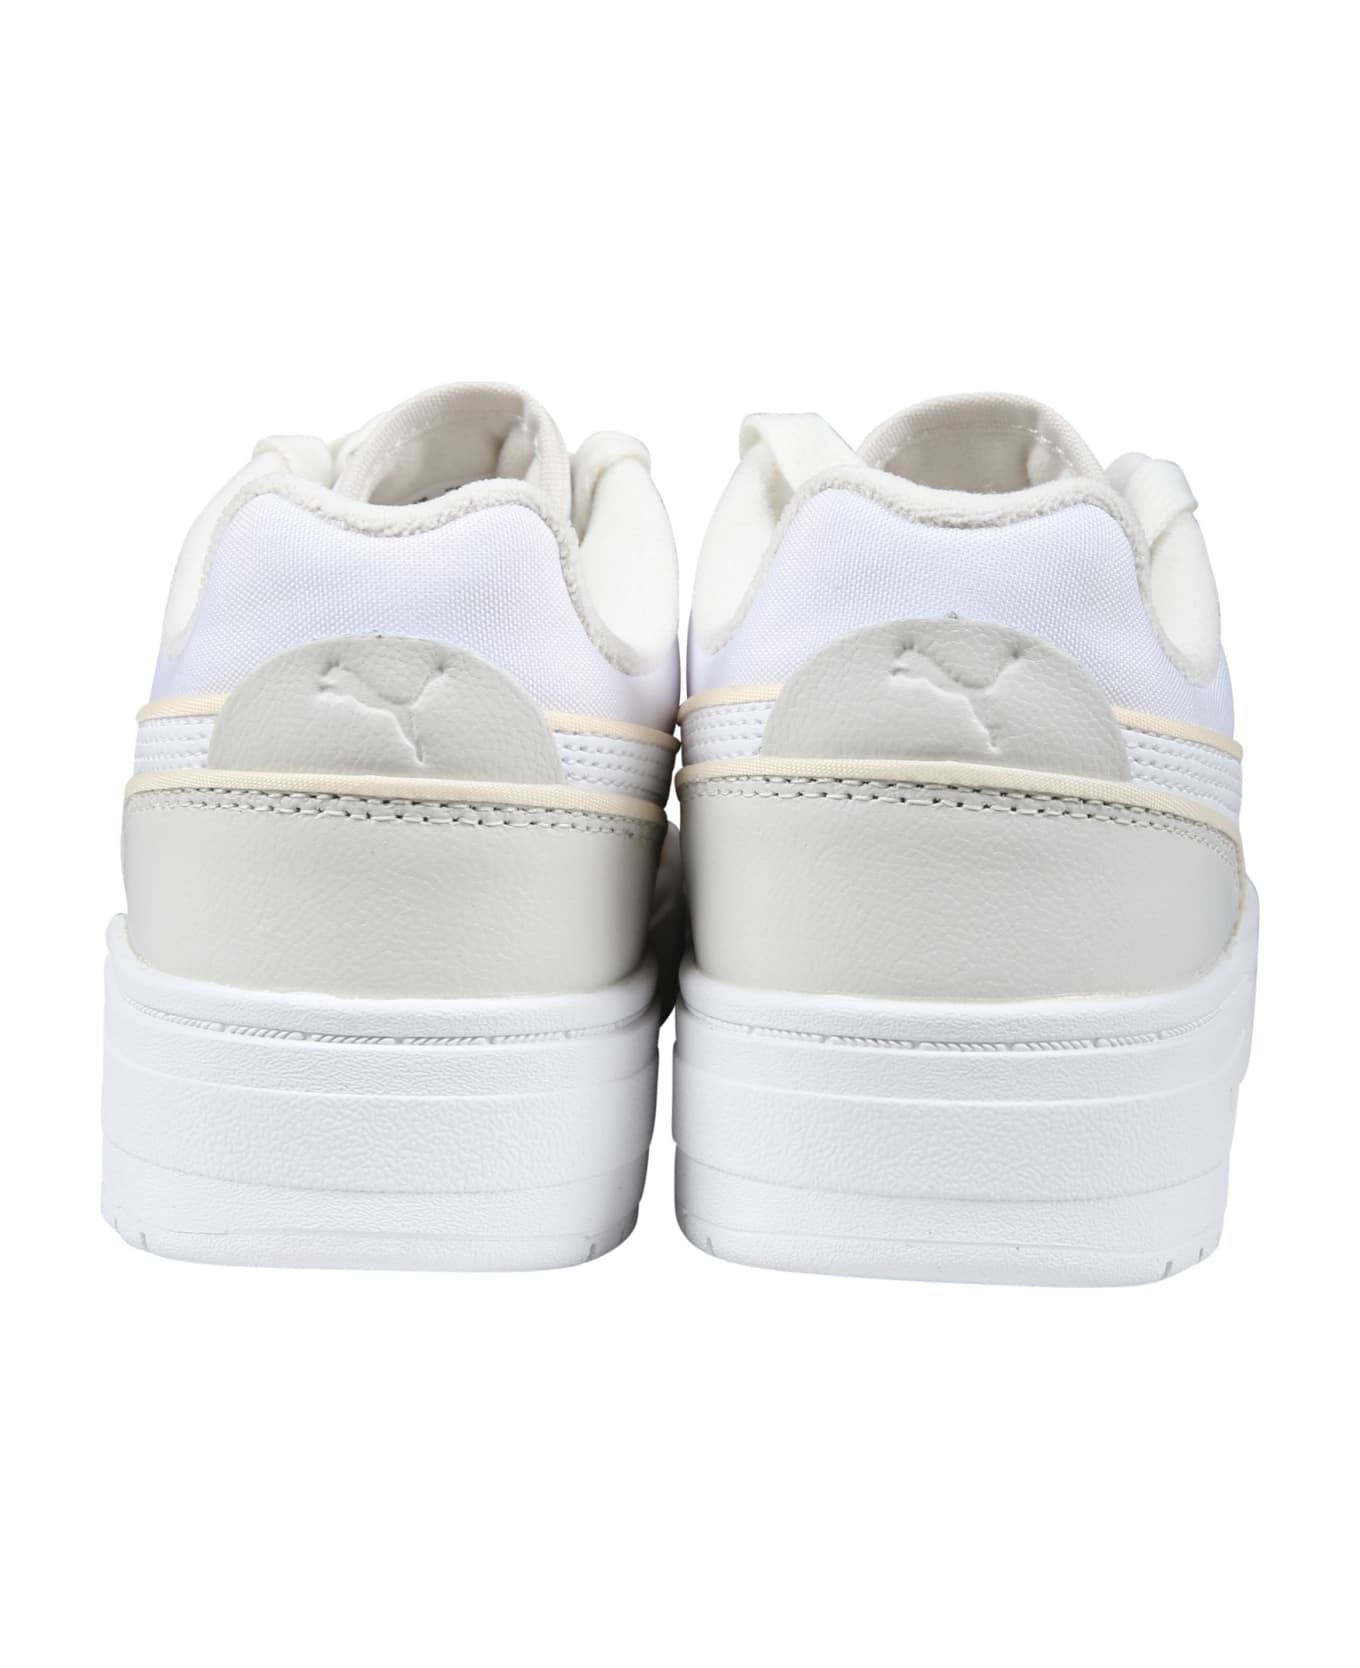 Puma Ca Pro Lux Iii White Low Sneakers For Kids - White